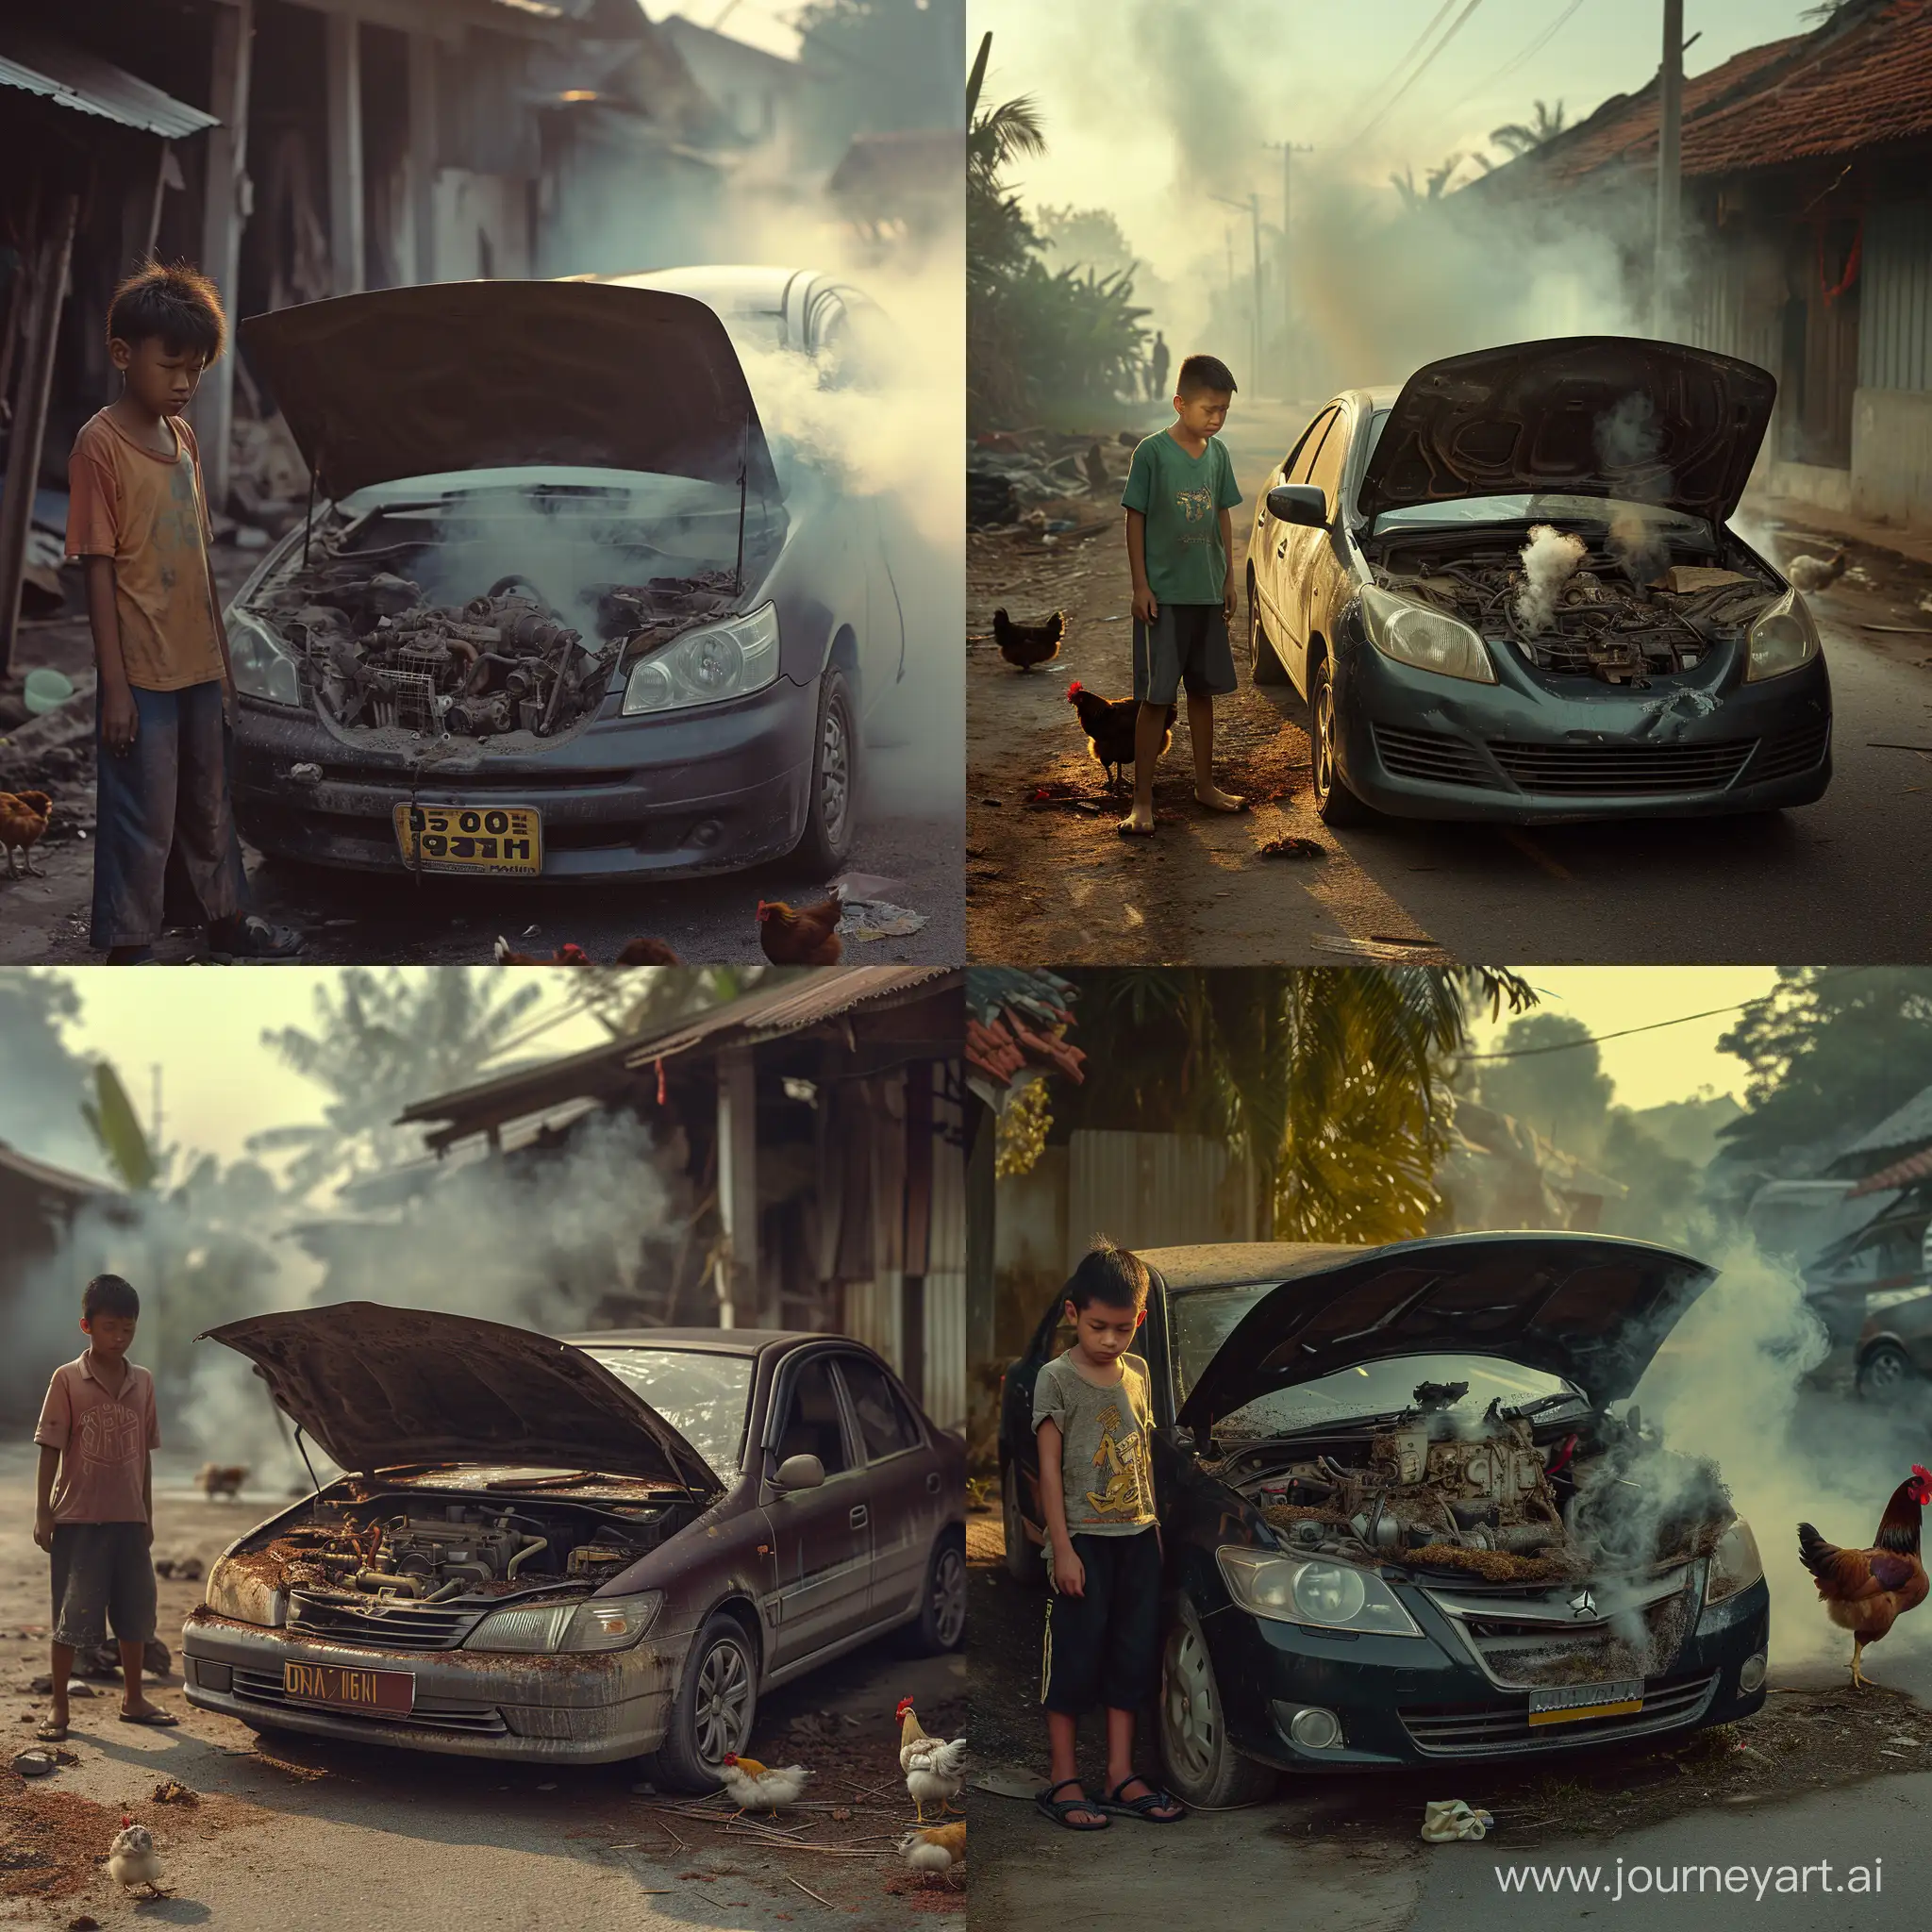 Ultra realistic, close up, car broke down on the side of the road. The front bonnet was open and there was smoke coming out of the car engine. Perodua myvi brand car made in Malaysia. A young Malay man stood next to the car with a sad face. the atmosphere of a Malay village in the morning with the refraction of the morning sun. There are chickens running around. canon eos-id x mark iii dslr --v 6.0